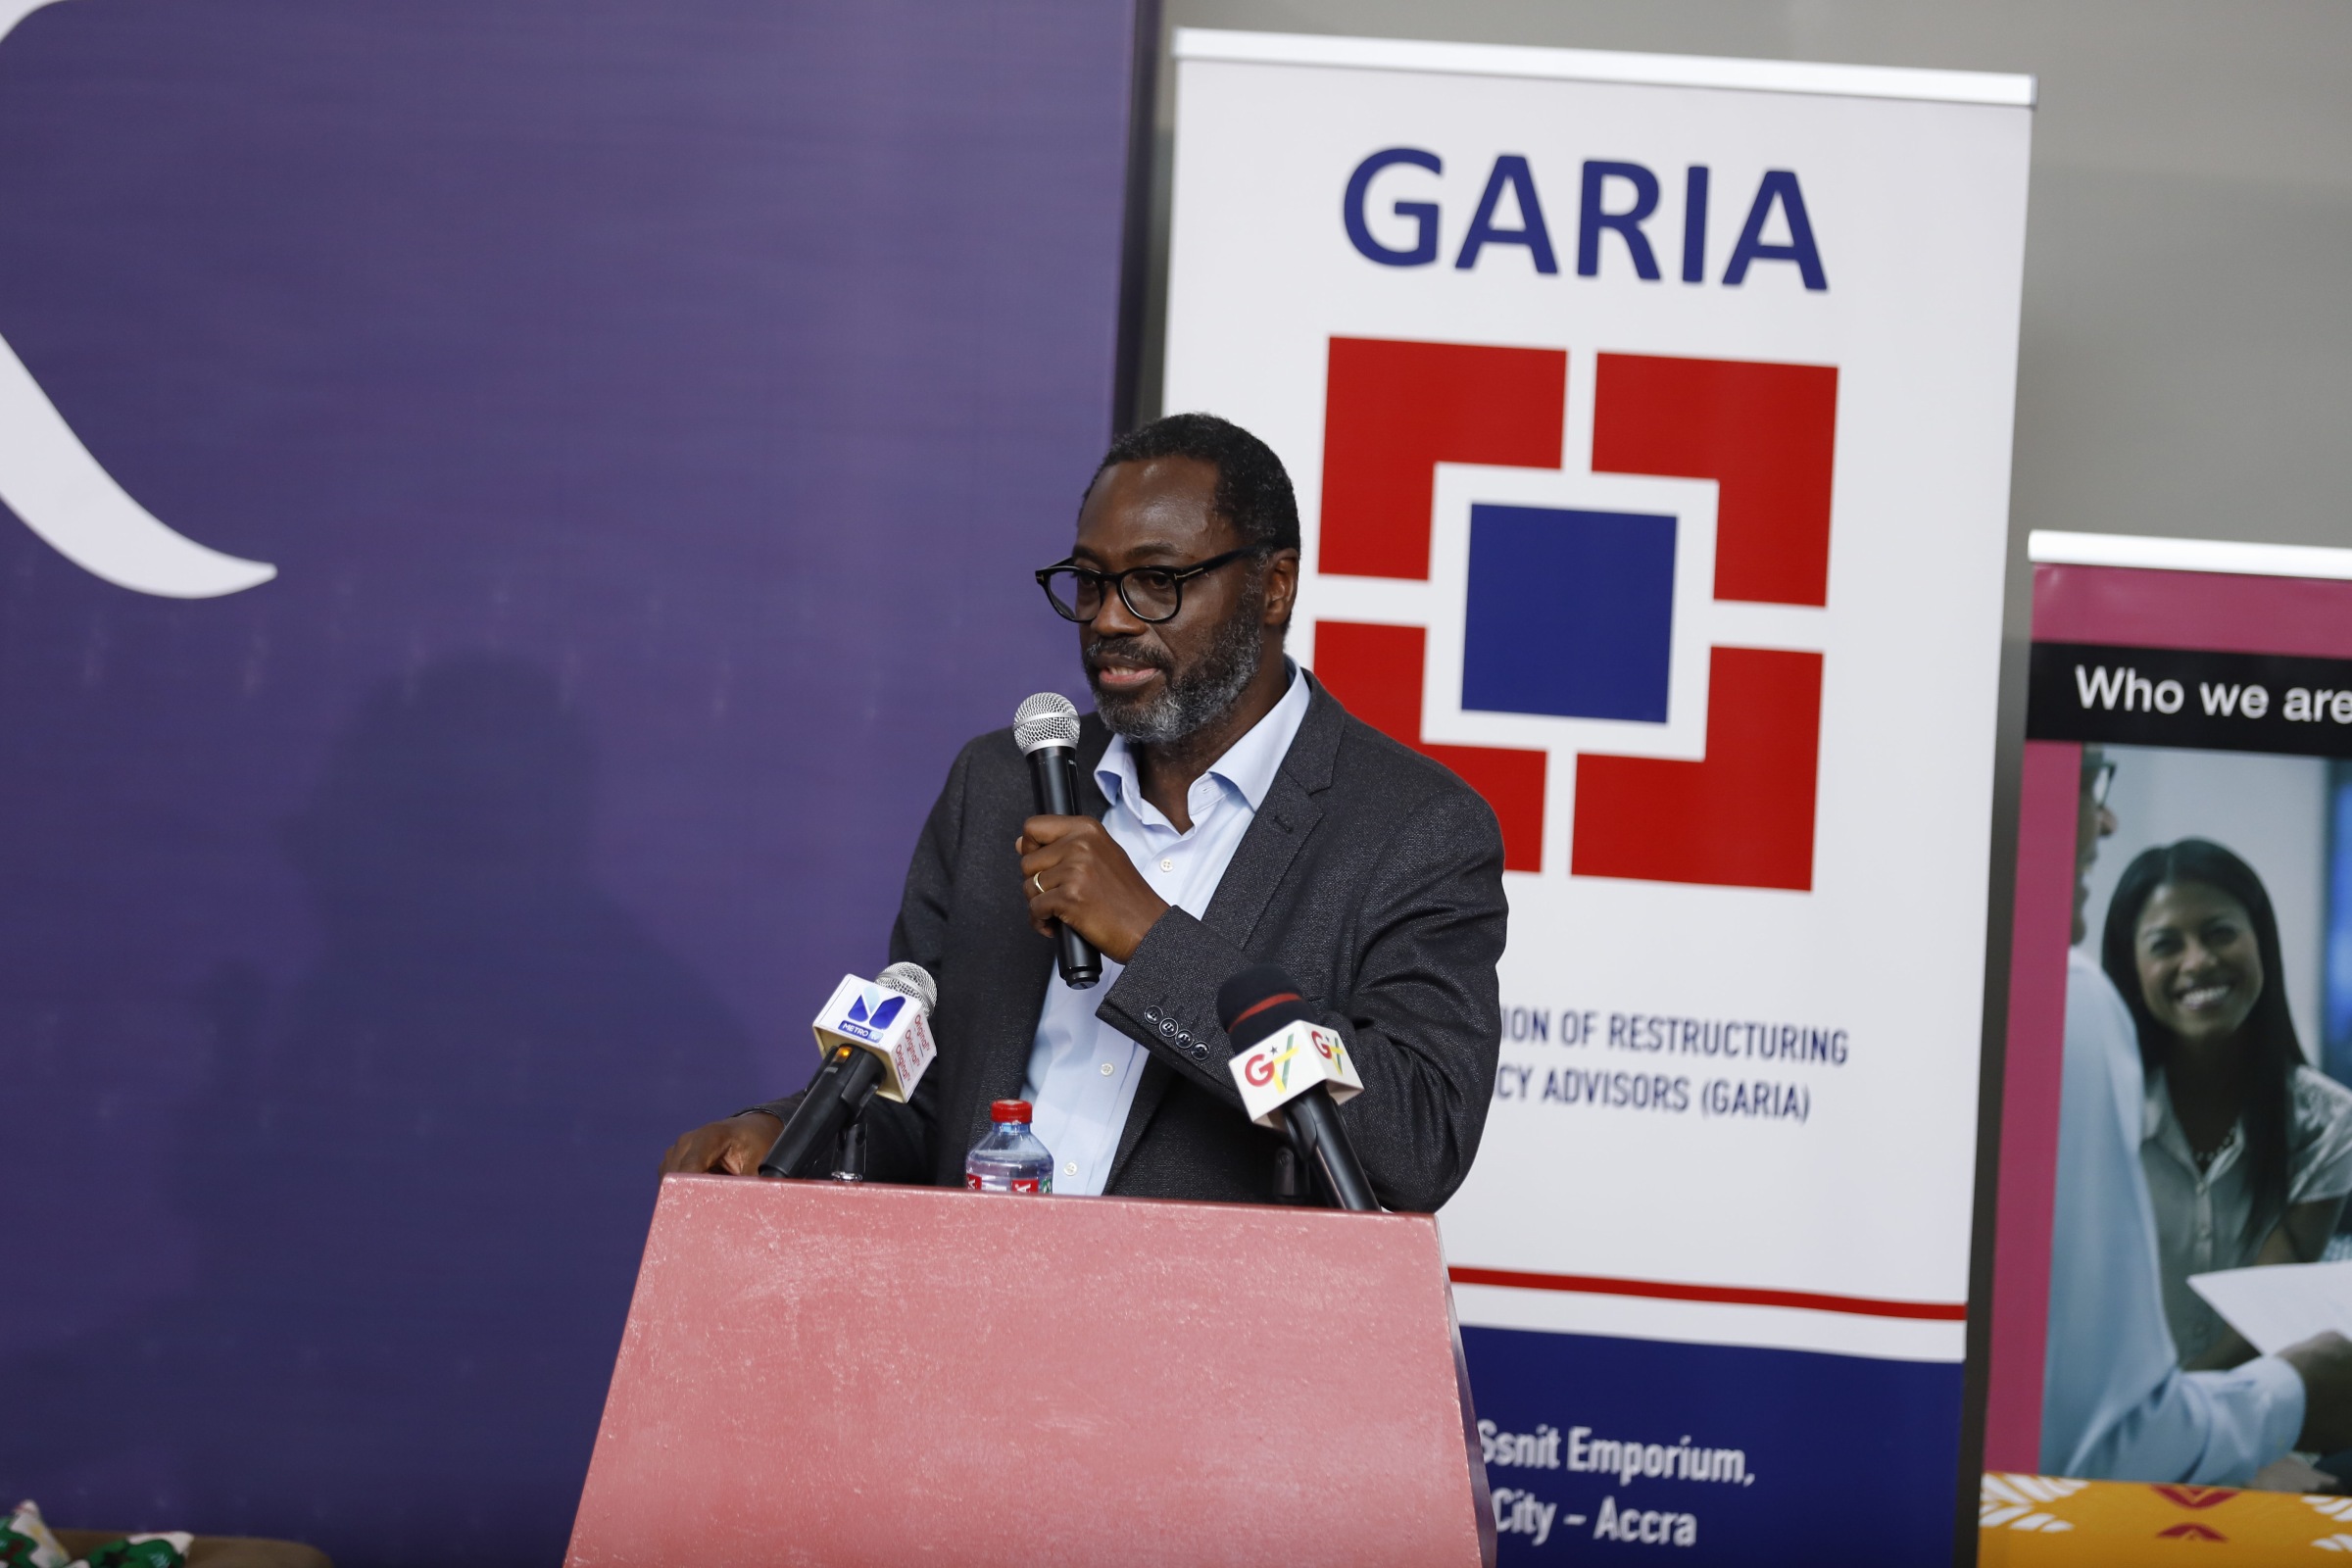 George Fosu, Chief Executive Officer of GARIA speaking at the opening of the seminar